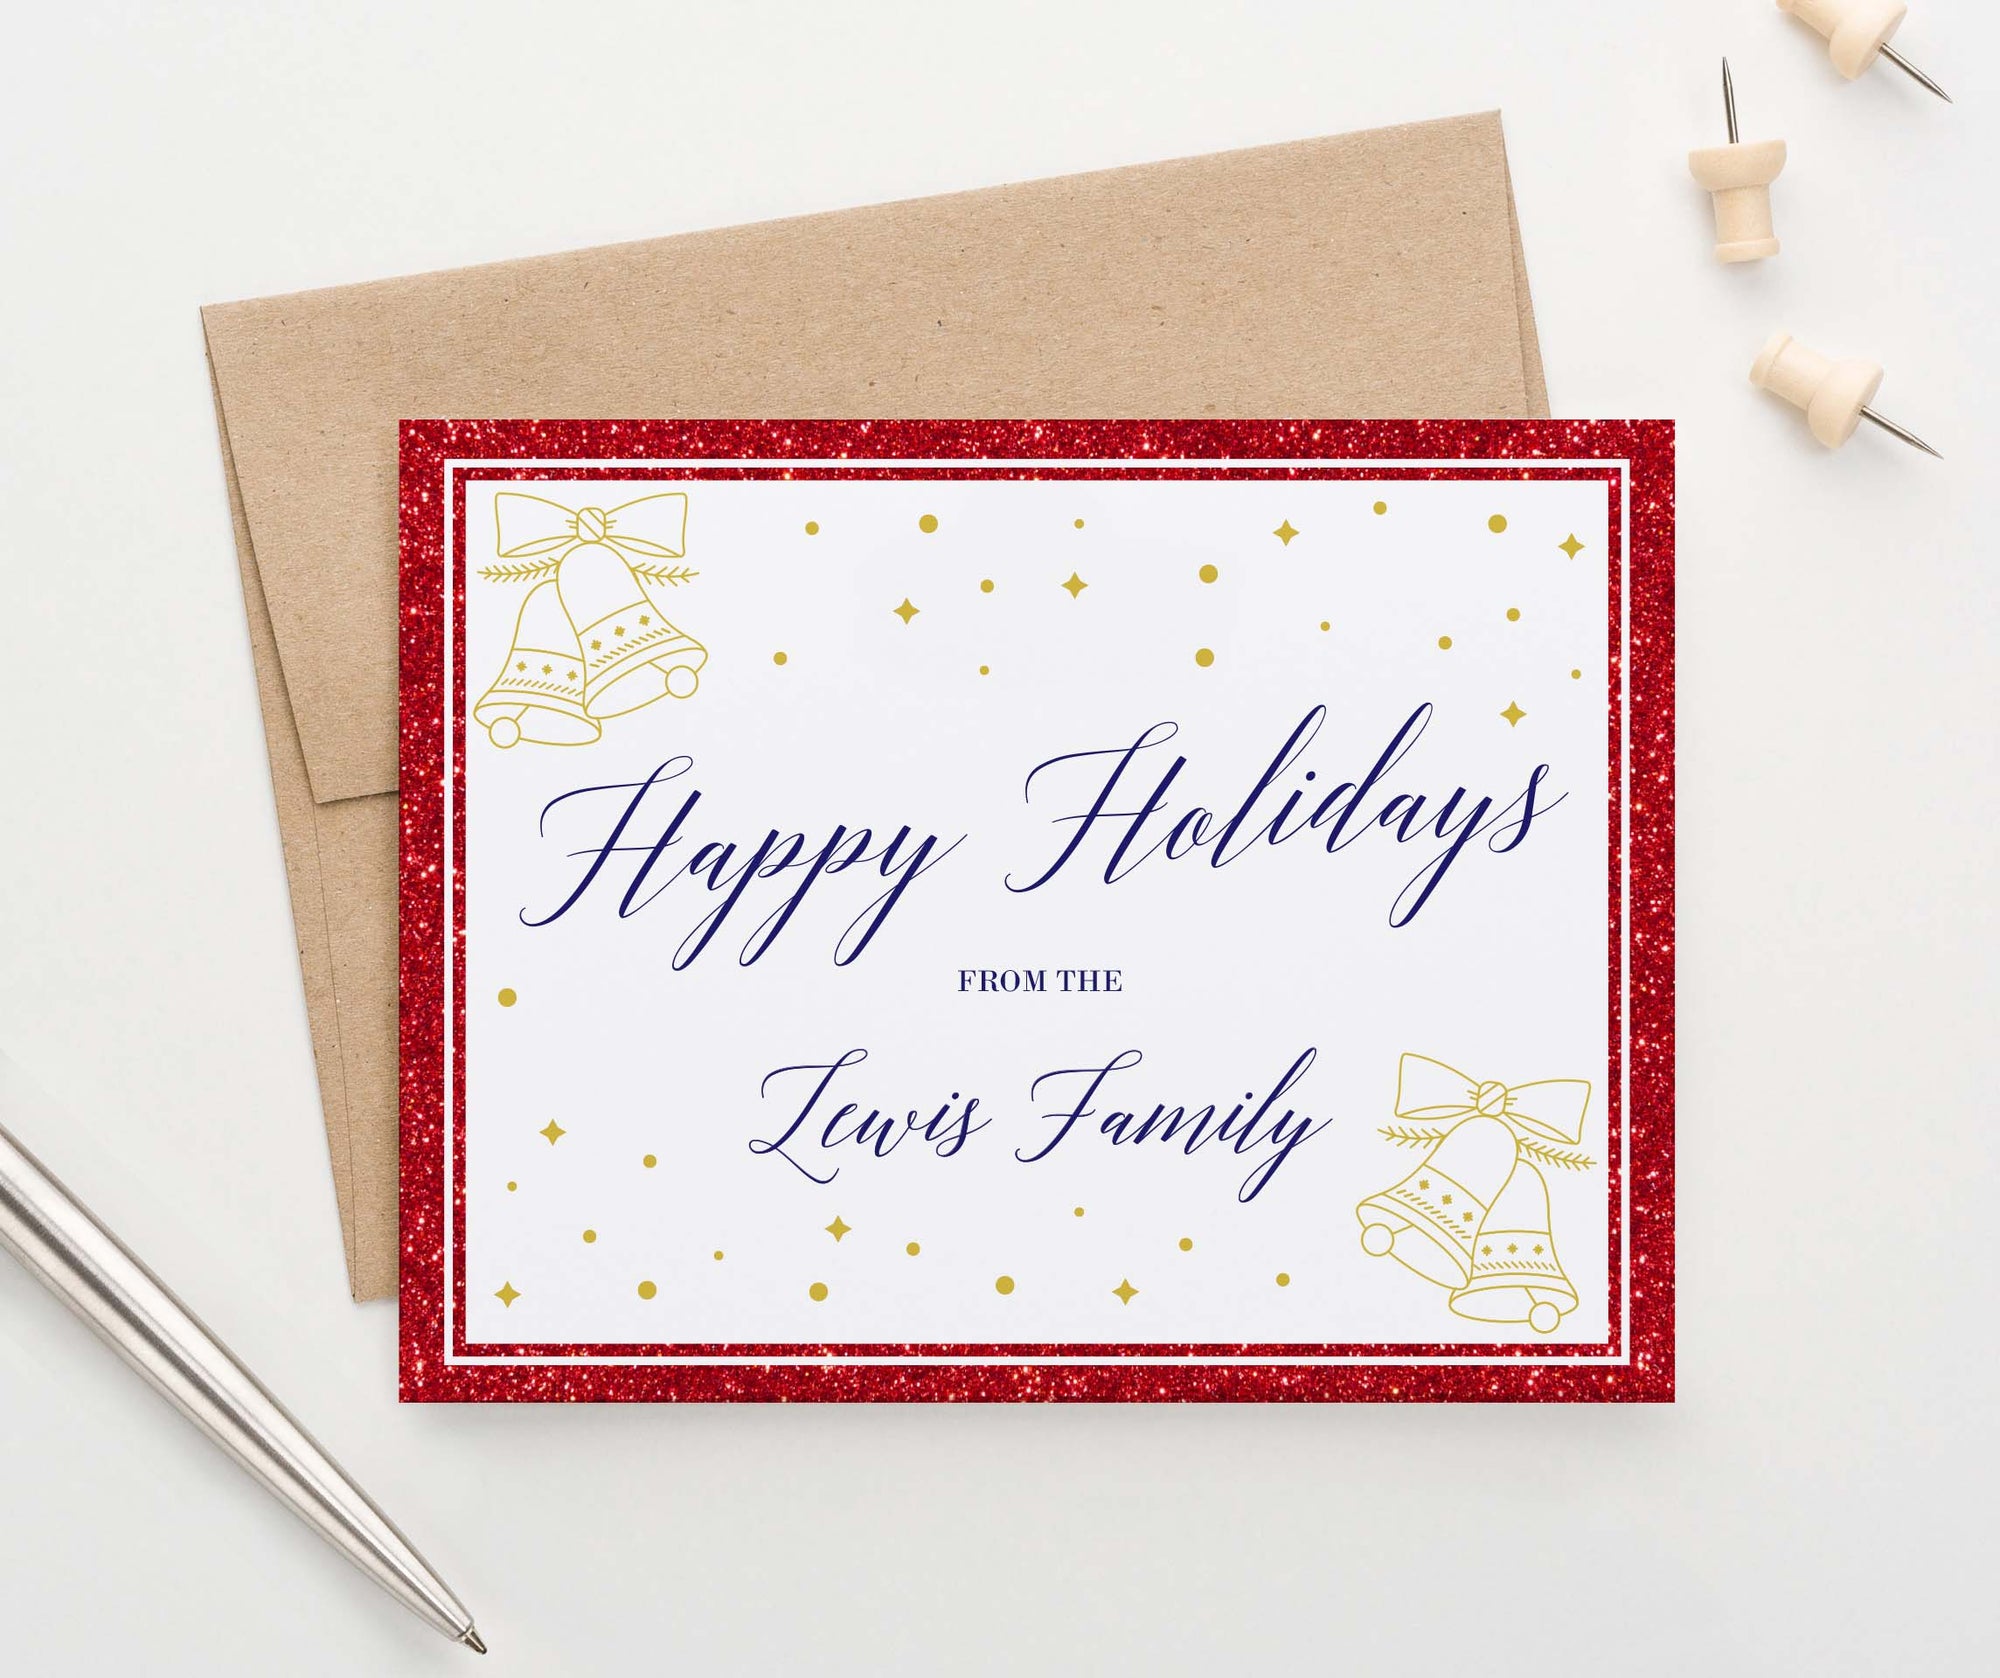 HGC003 glitter red border folded personalized holiday cards with gold bells elegant christmas